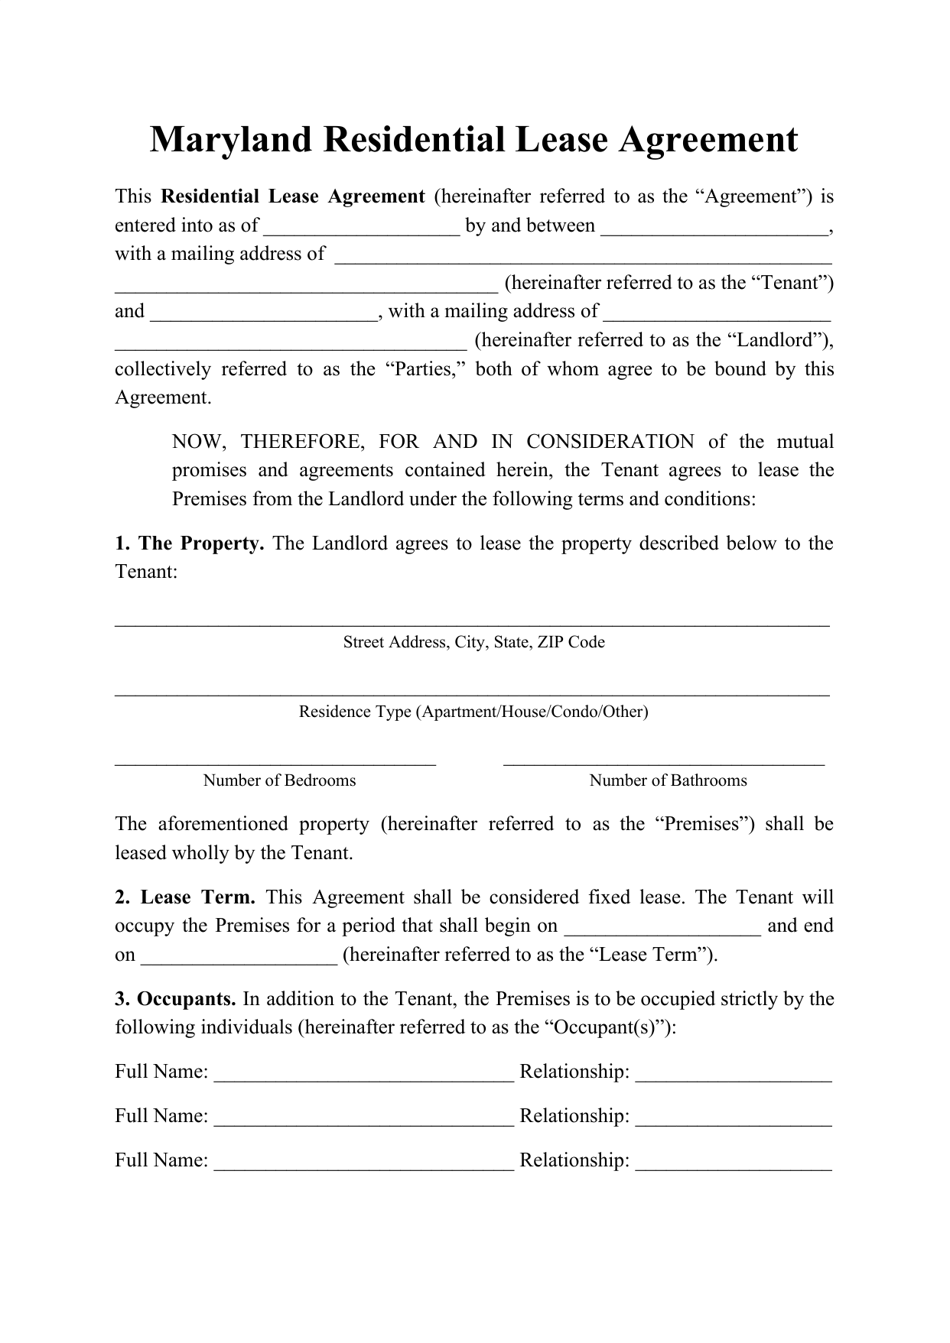 Maryland Residential Lease Agreement Template Fill Out Sign Online